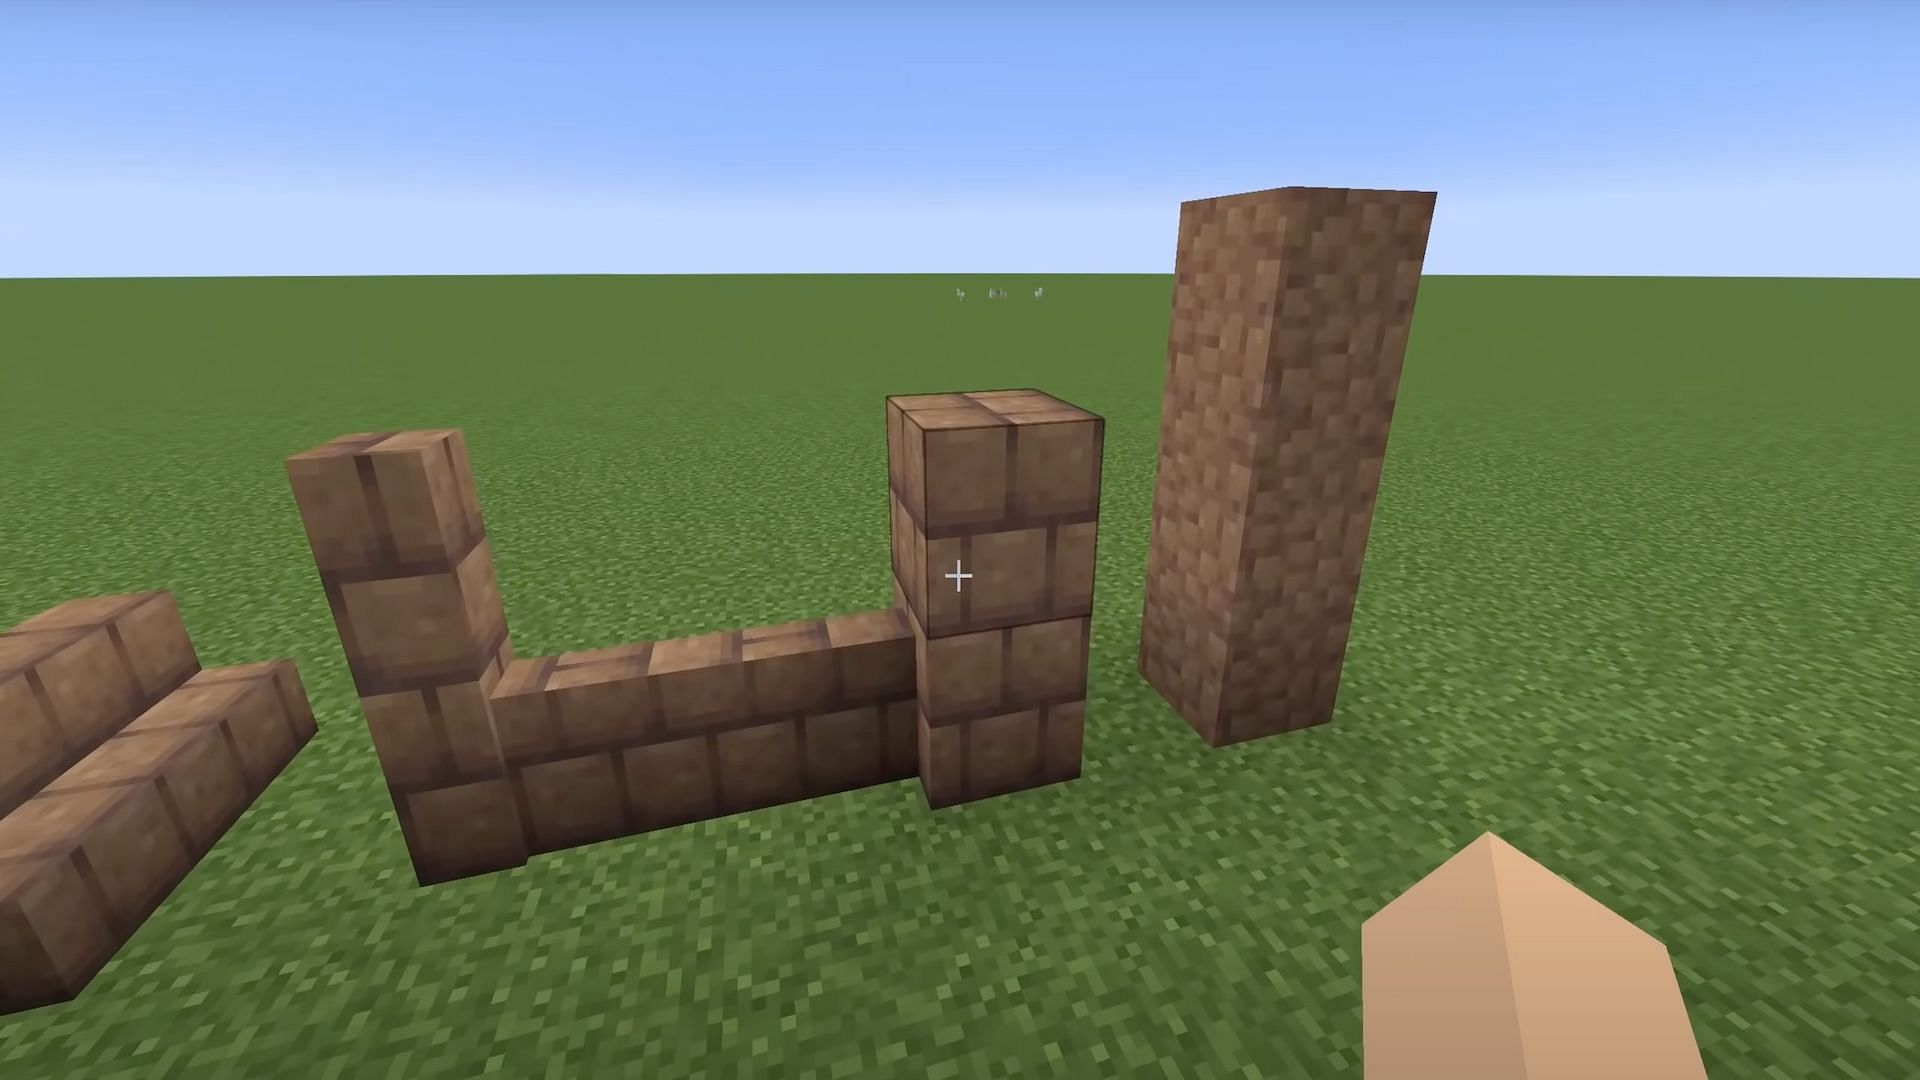 Players can use mud for many different inspired blocks and builds in Minecraft (Image via Prowl8413/YouTube)